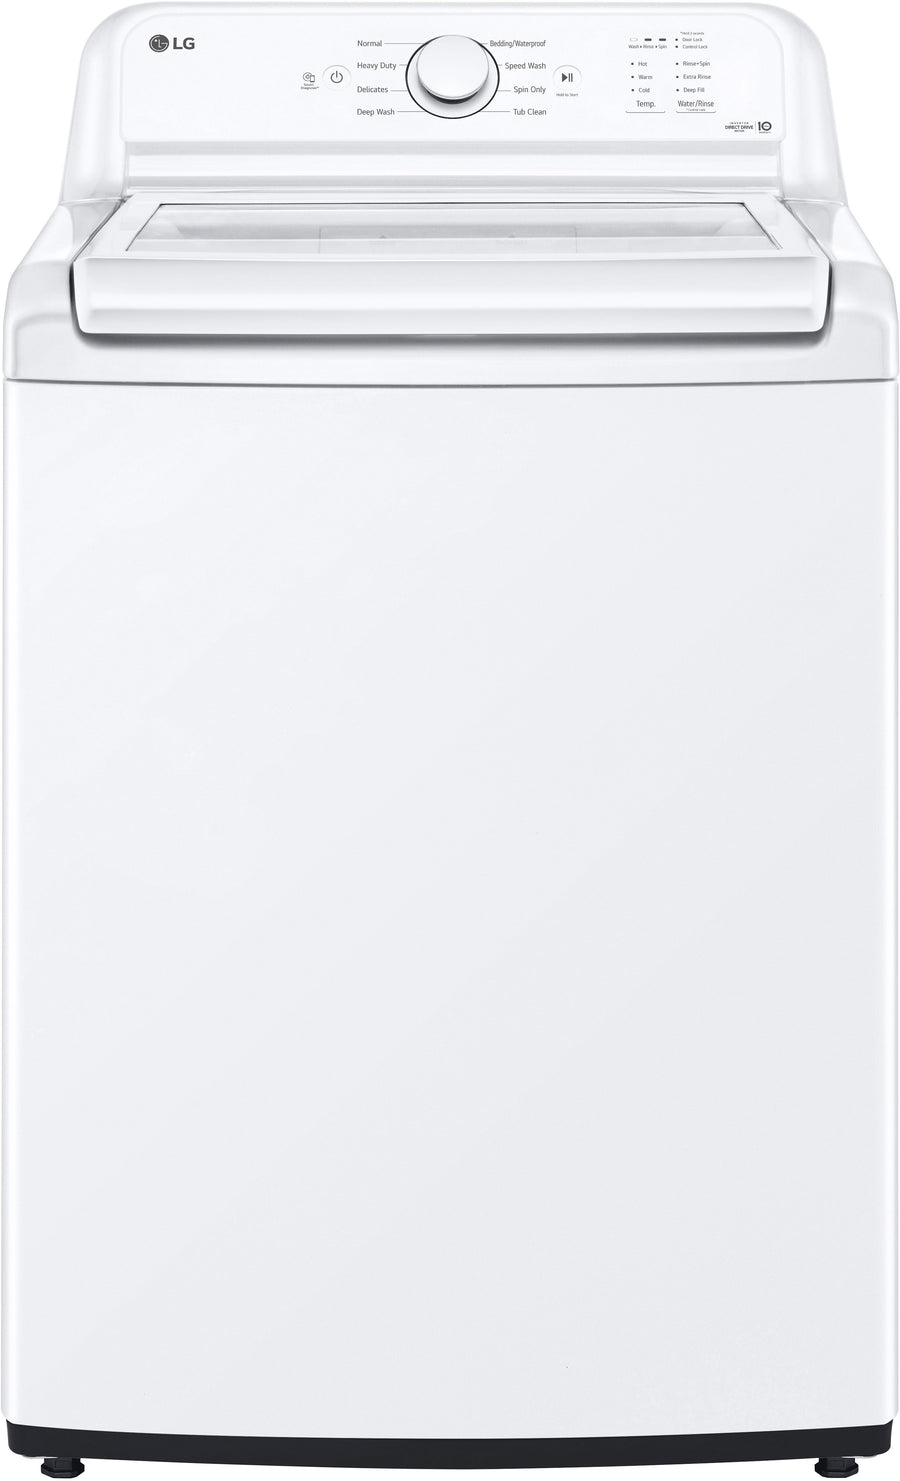 LG - 4.1 Cu. Ft. Smart Top Load Washer with SlamProof Glass Lid - White_0